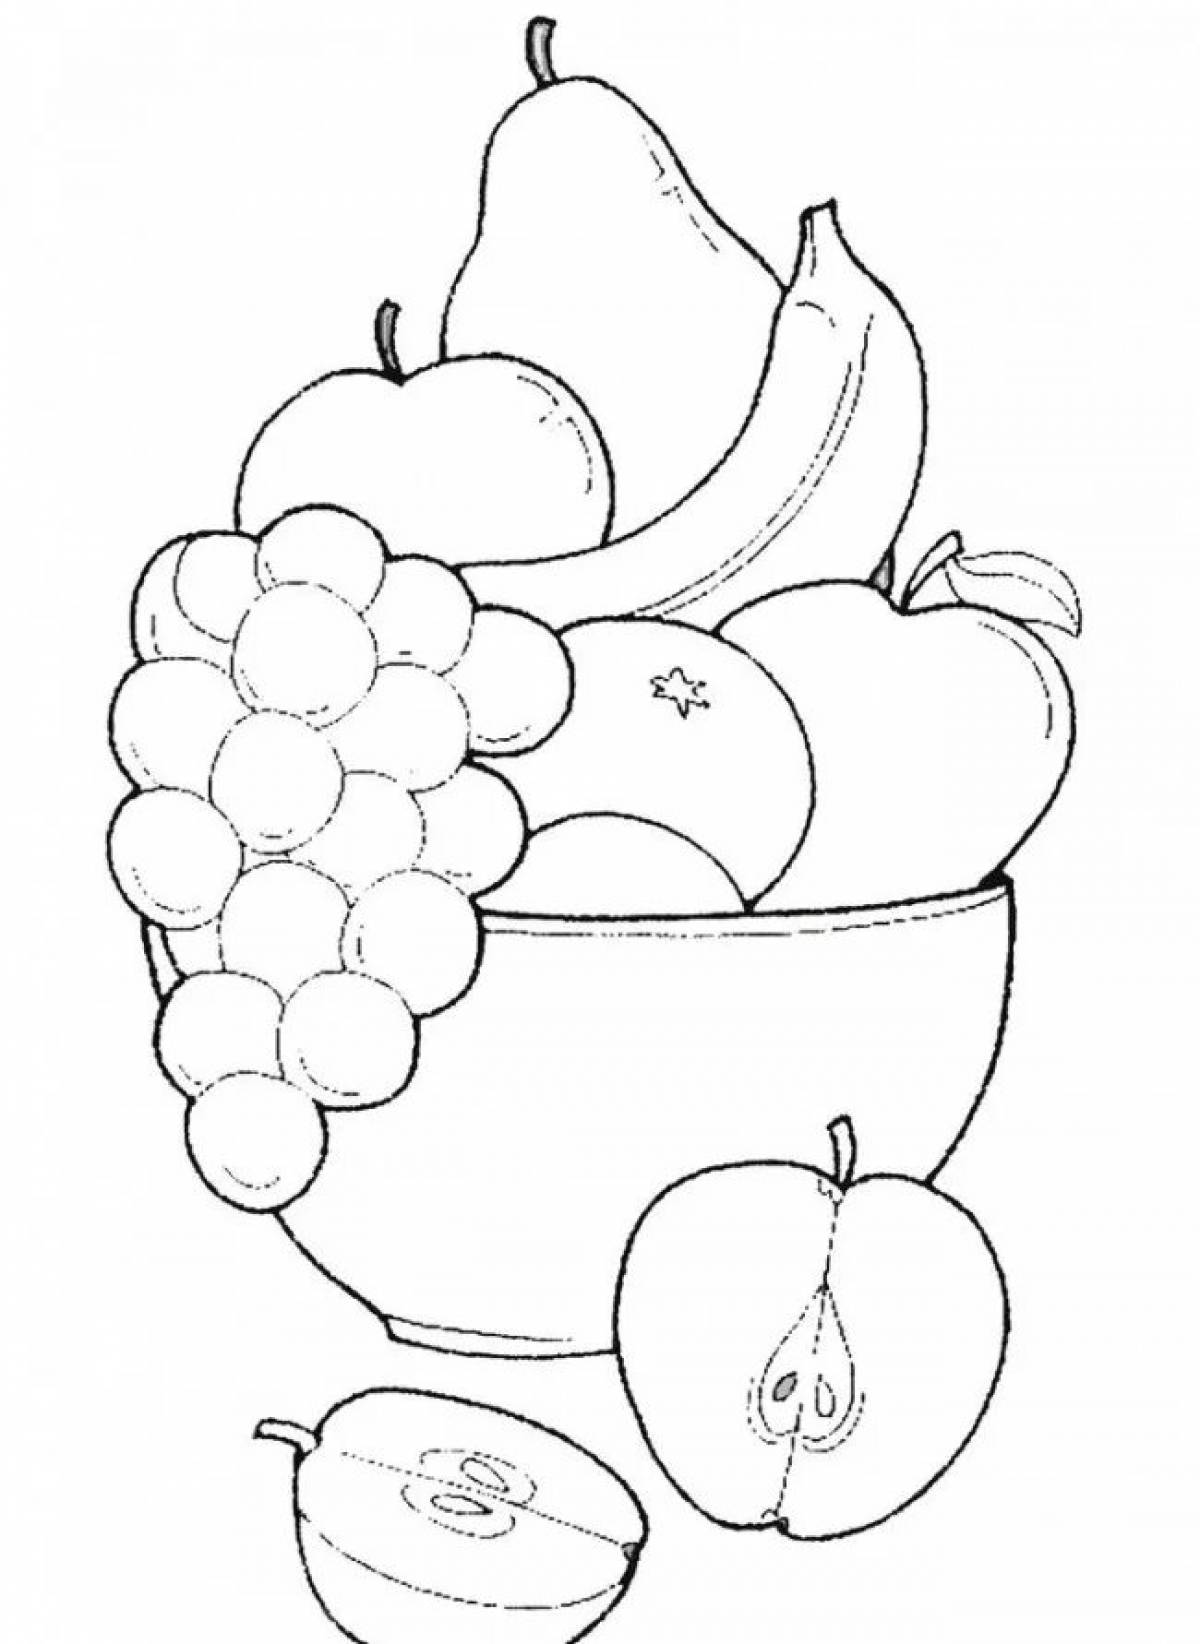 Color mug with still life depiction of apple and pear